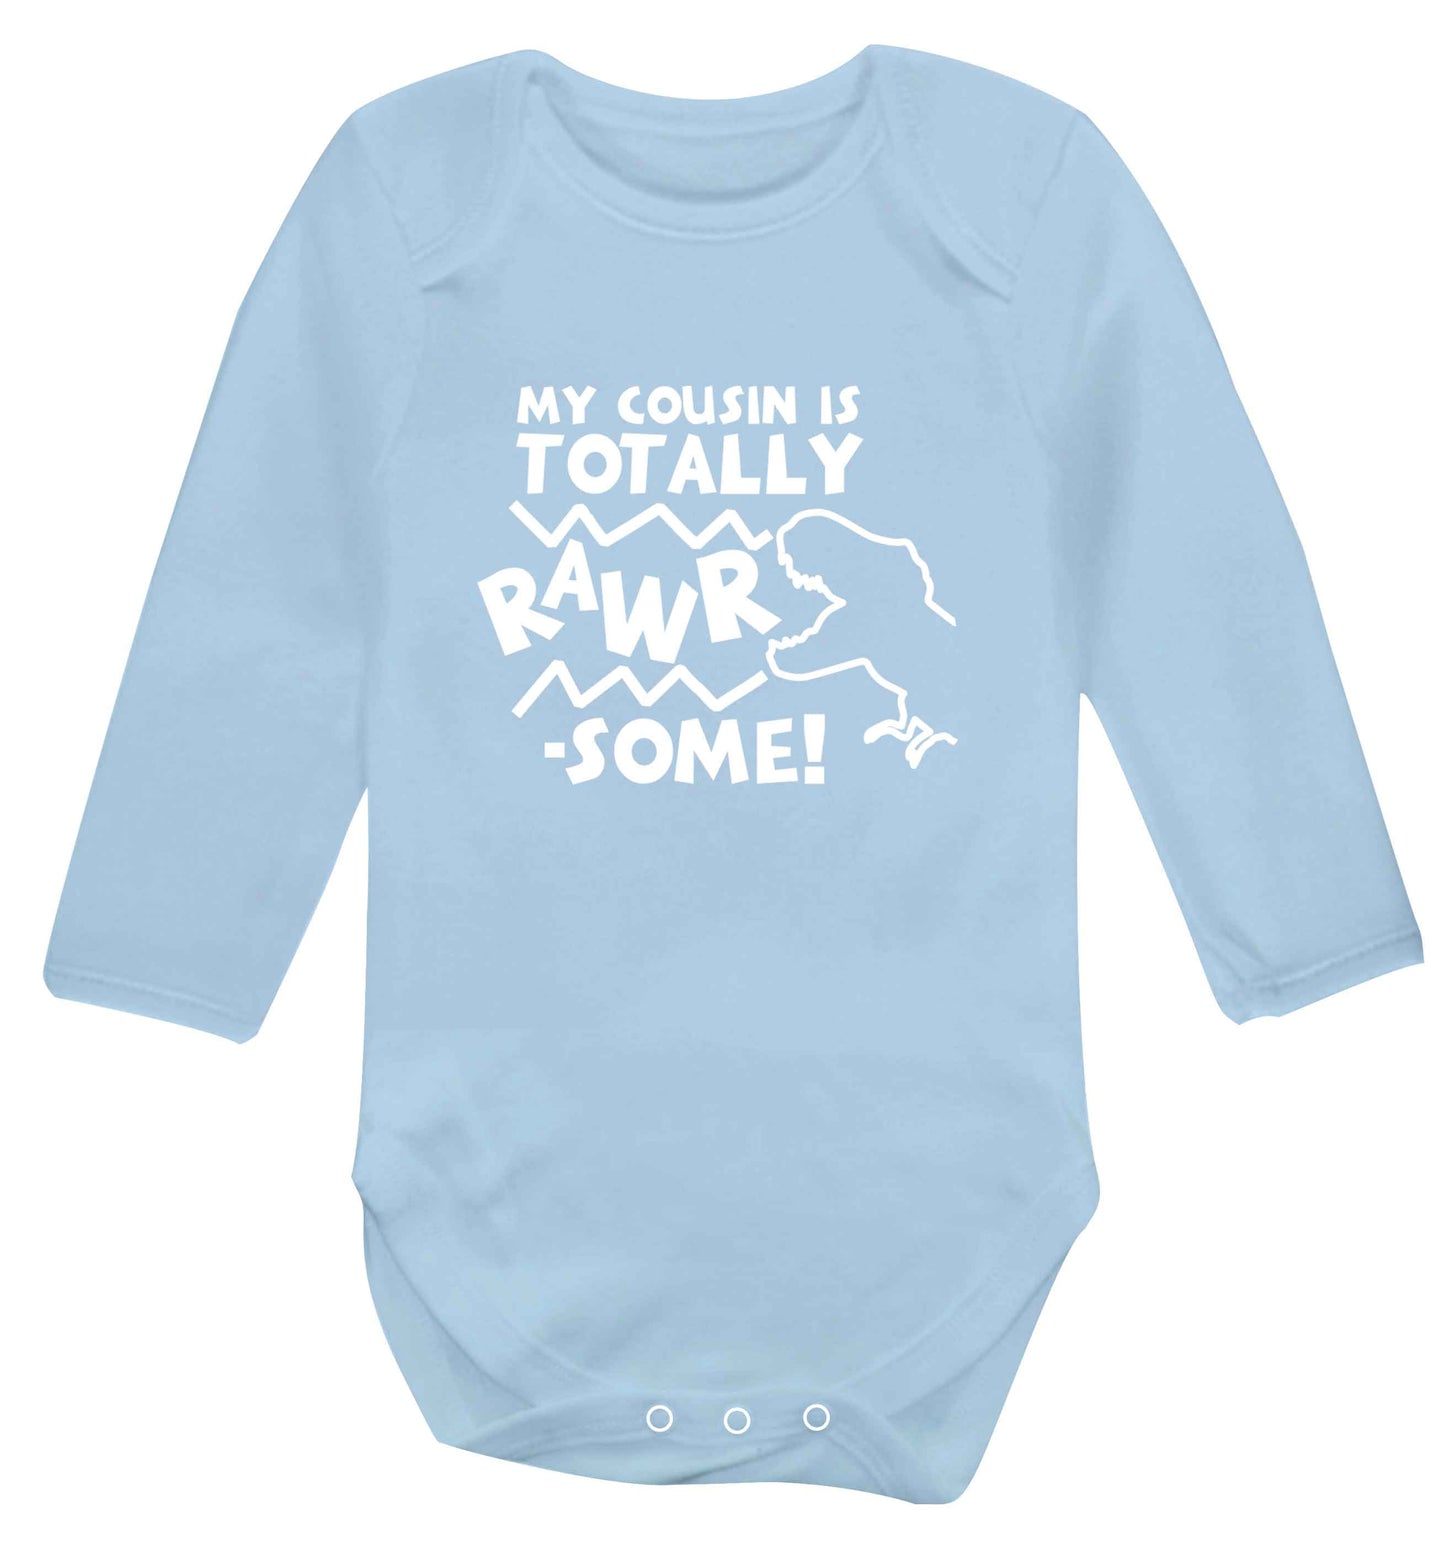 My cousin is totally rawrsome baby vest long sleeved pale blue 6-12 months